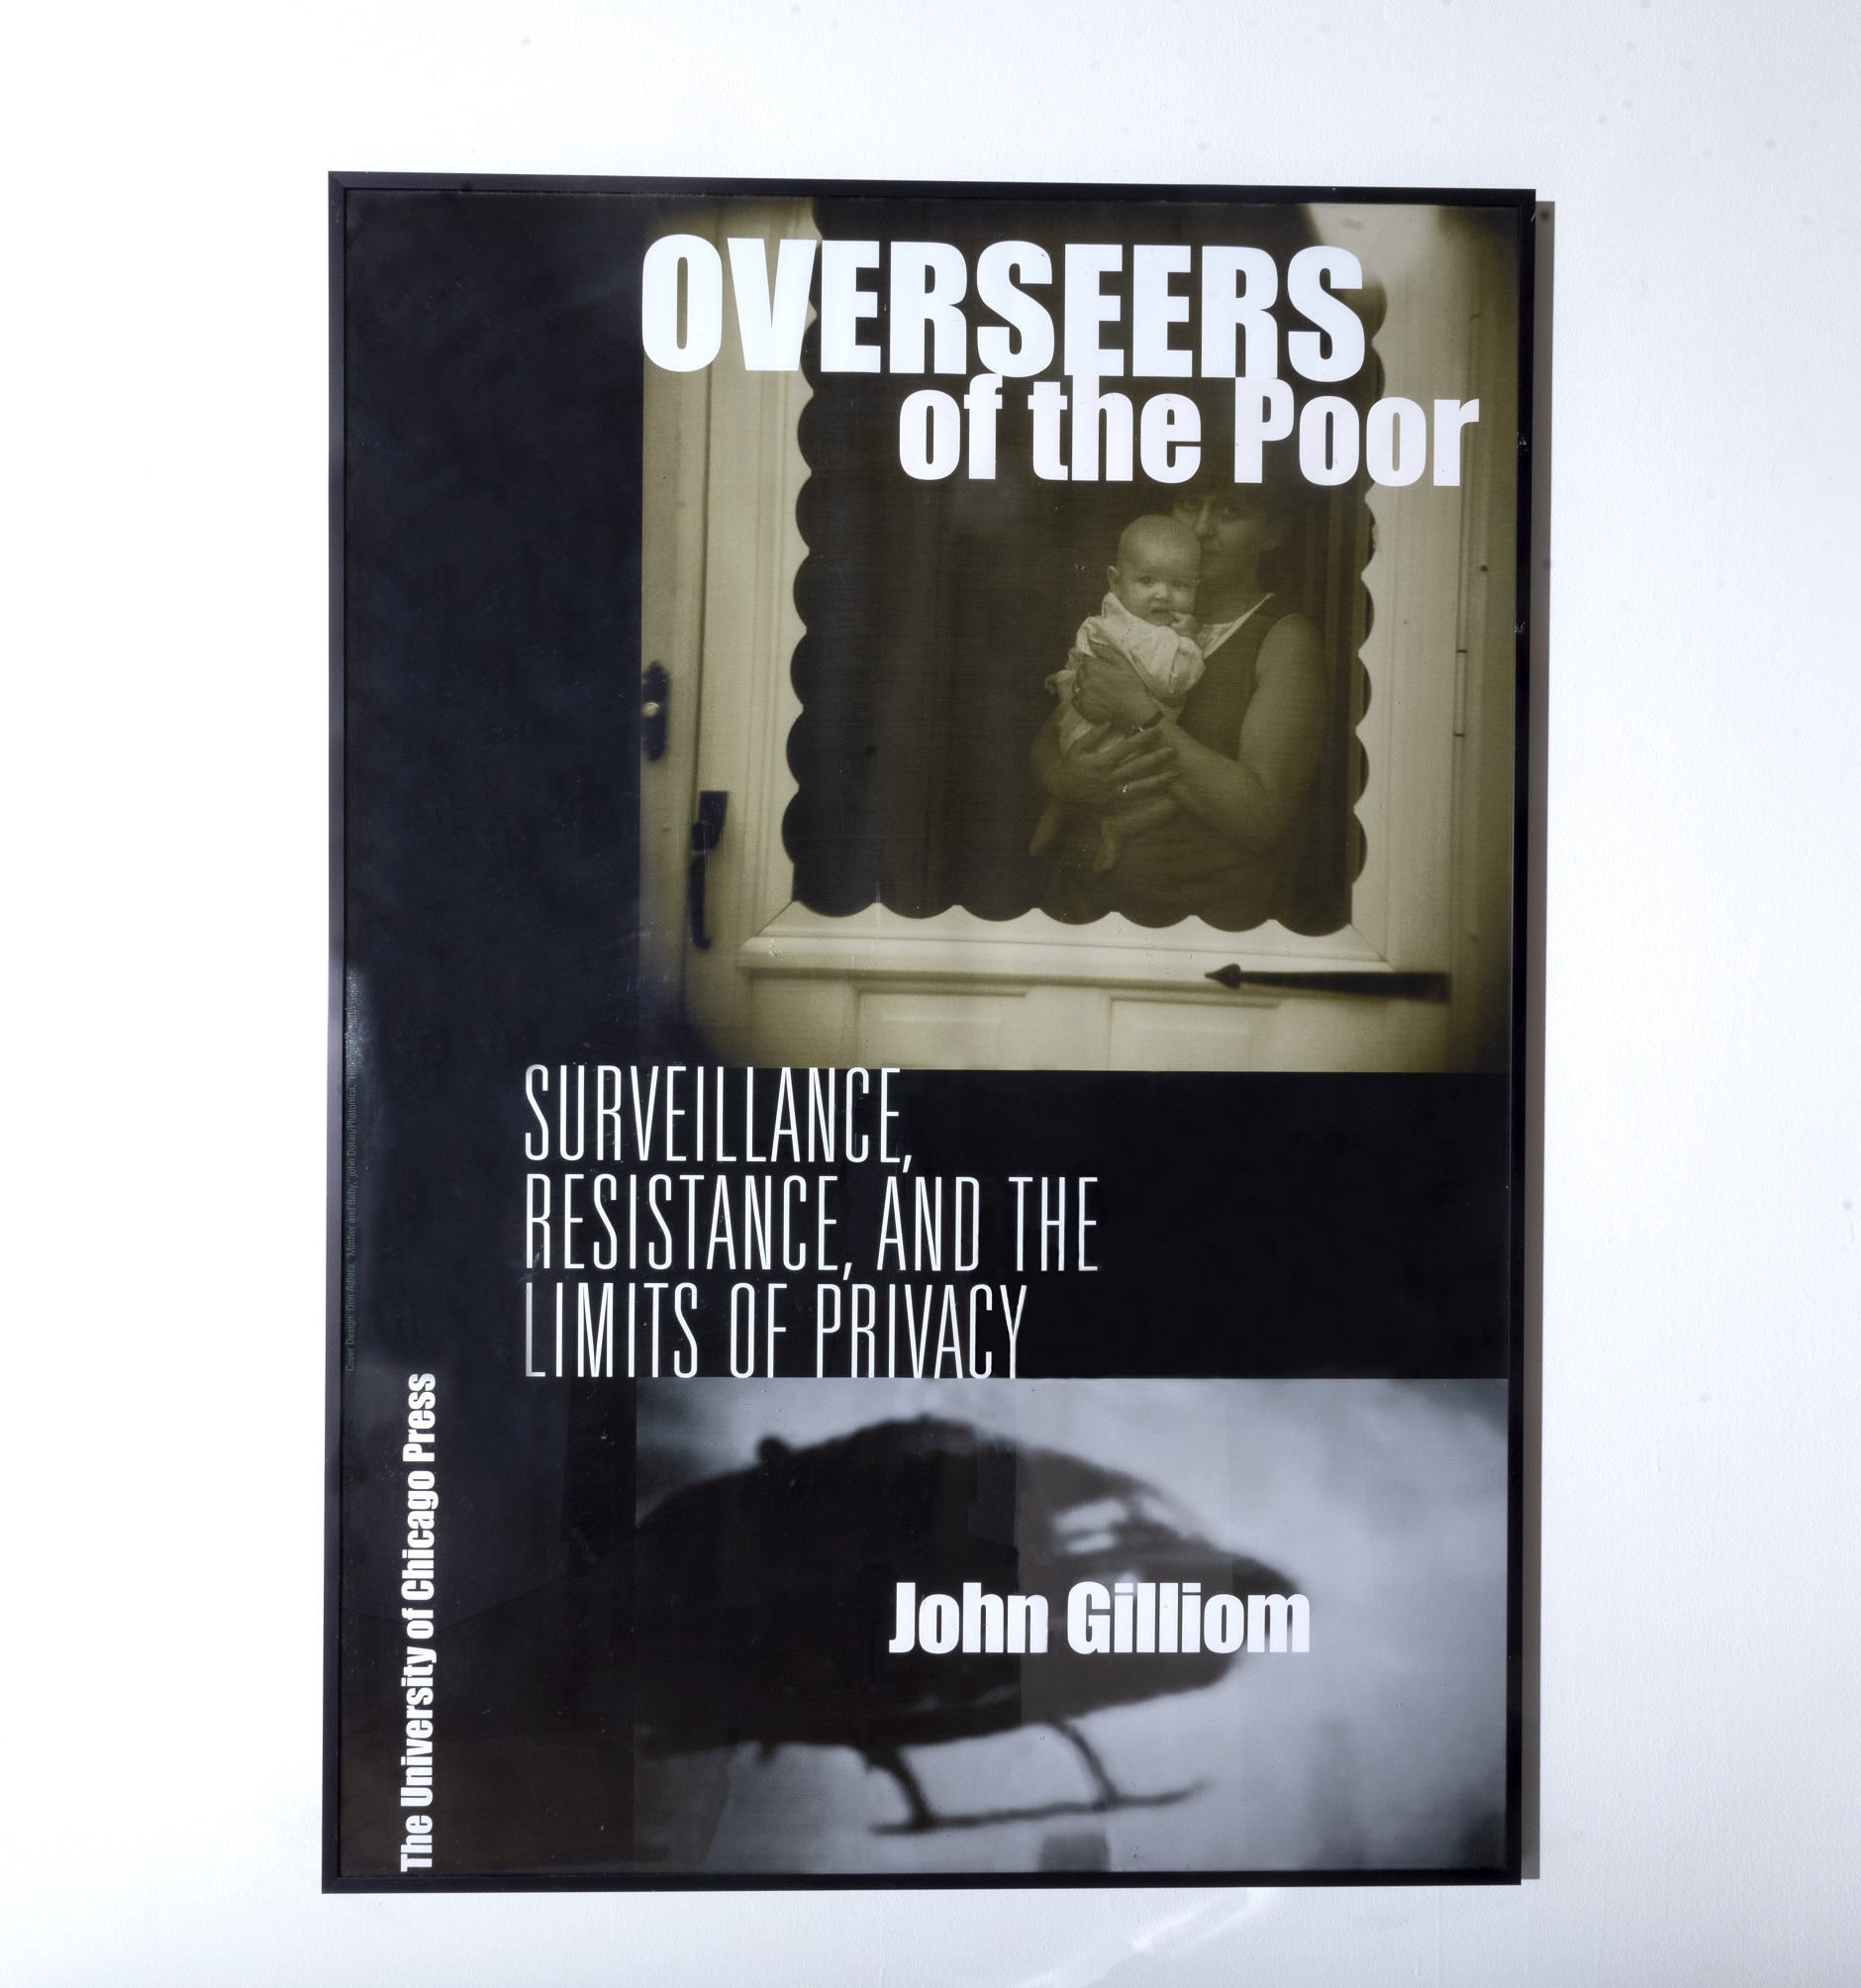 Book Cover Design of “Overseers of the Poor” by John Gillion